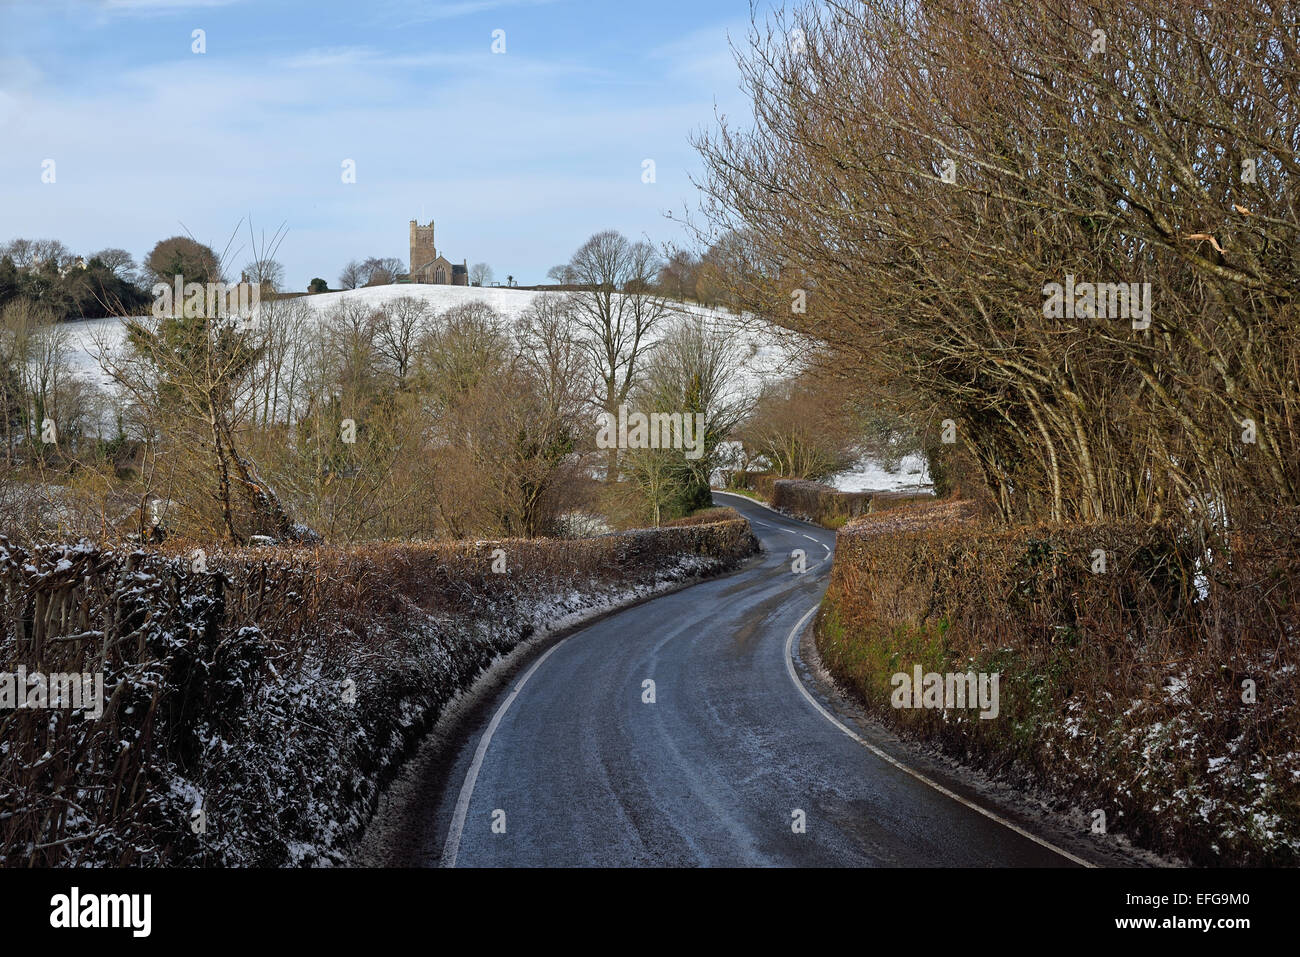 Road approaching Moretonhampstead, Dartmoor National Park in winter. The parish church of St Andrew can be seen on the hill. Stock Photo